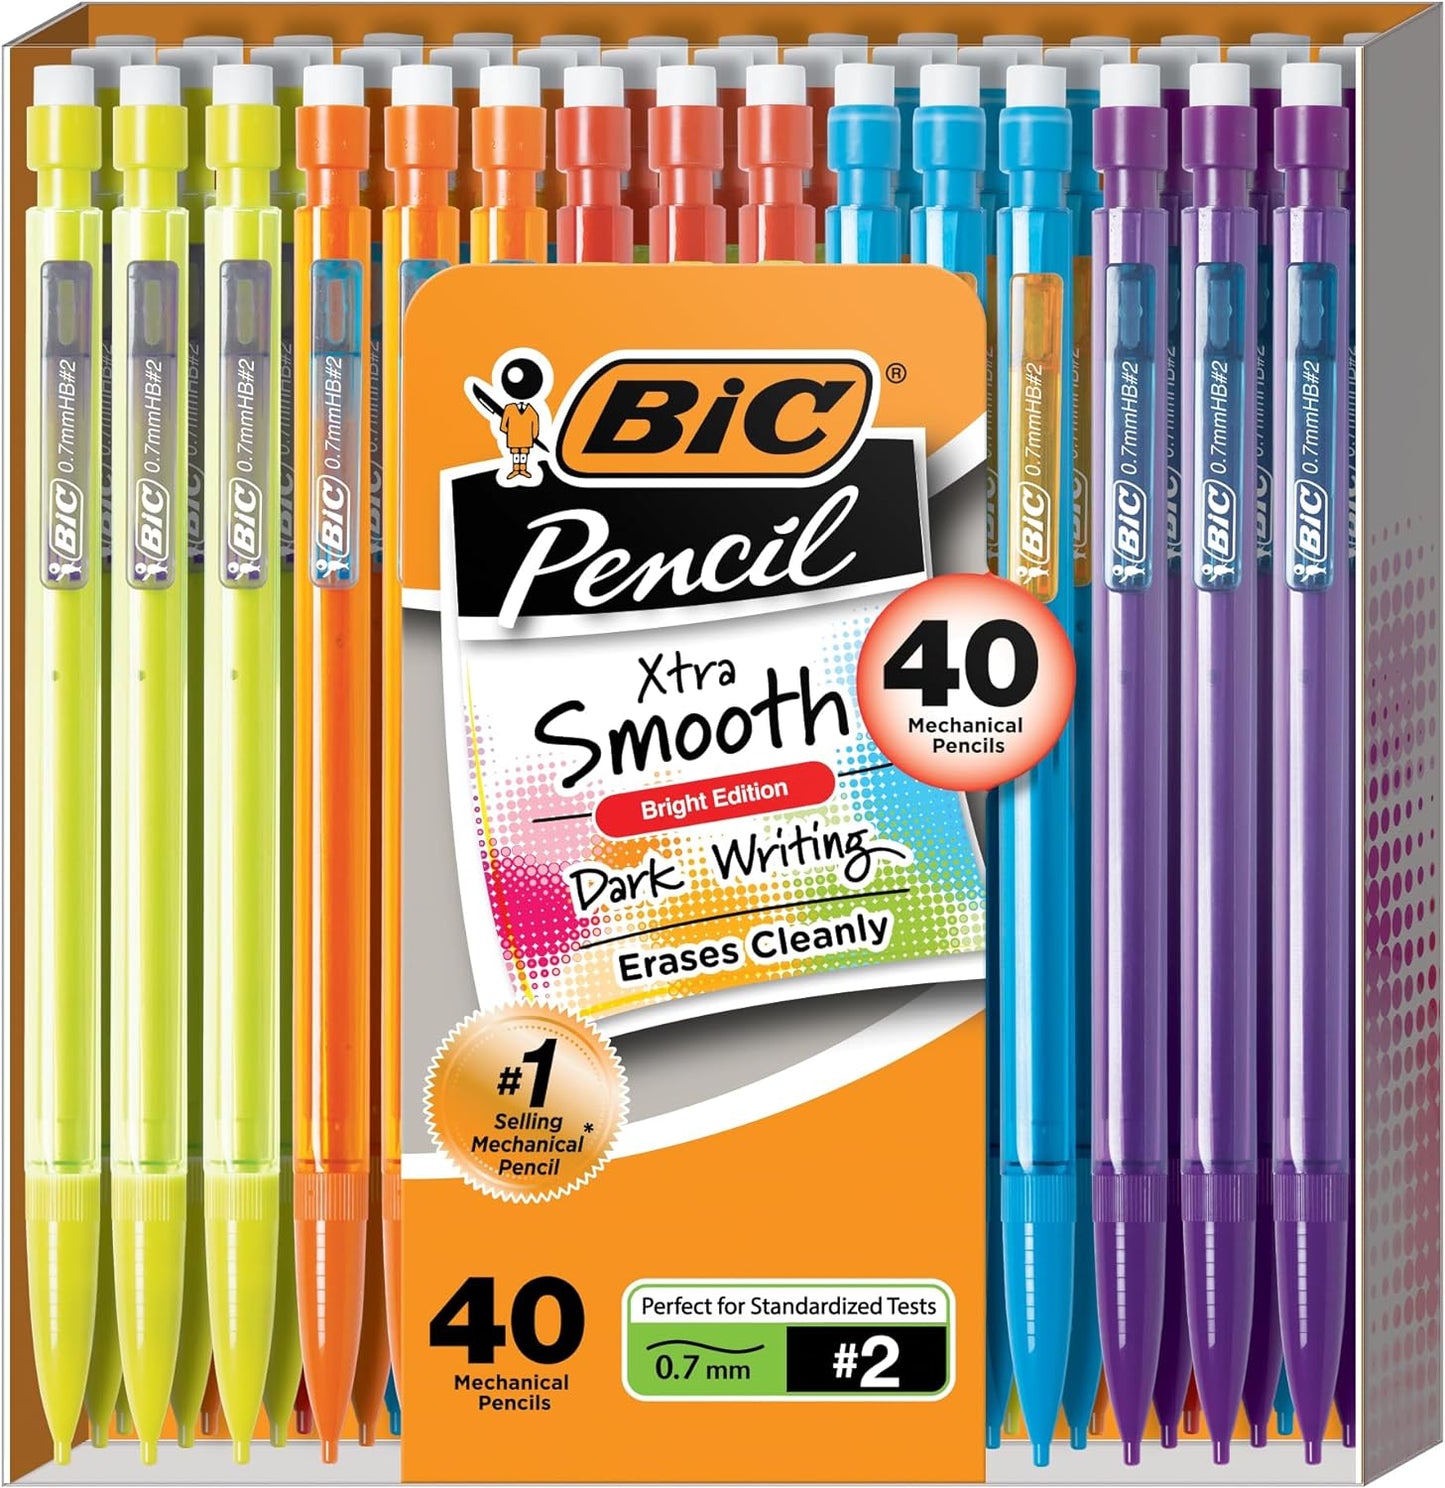 Xtra-Smooth Mechanical Pencils with Erasers (MPCE40-BLK), Bright Edition Medium Point (0.7Mm), 40-Count Pack, Bulk Mechanical Pencils for School, Barrel Colors May Vary